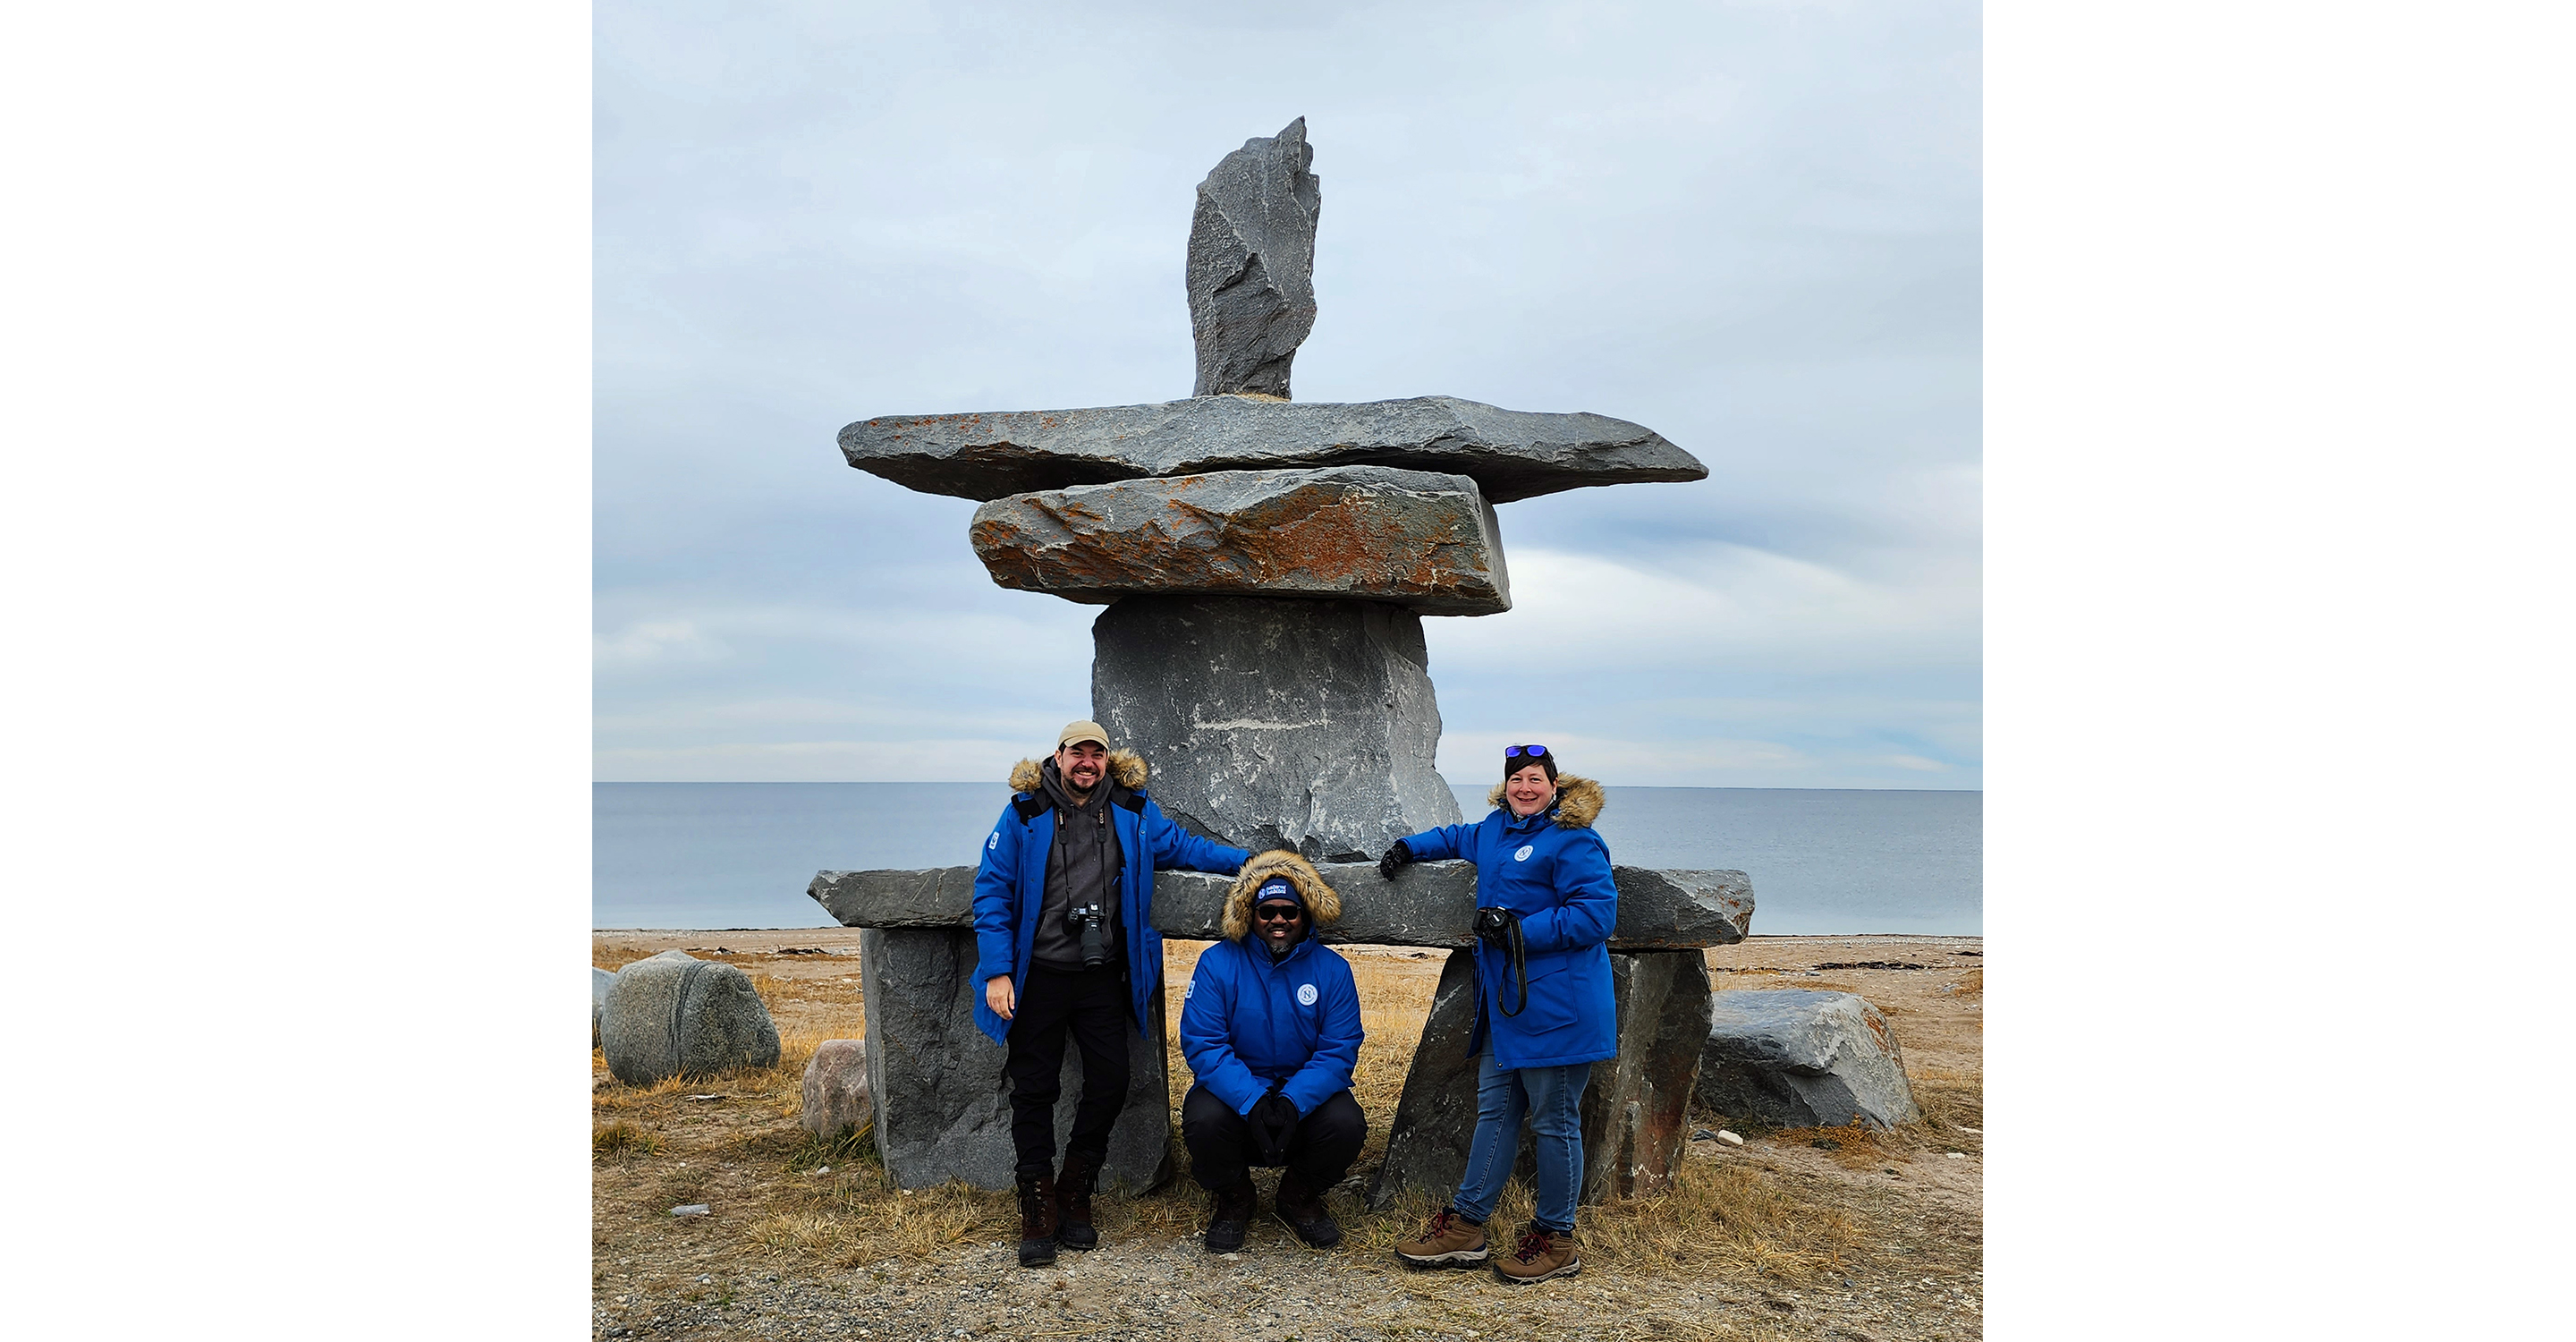 An inukshuk on Hudson Bay in Churchill, Canada after several days of watching polar bears out on the tundra.